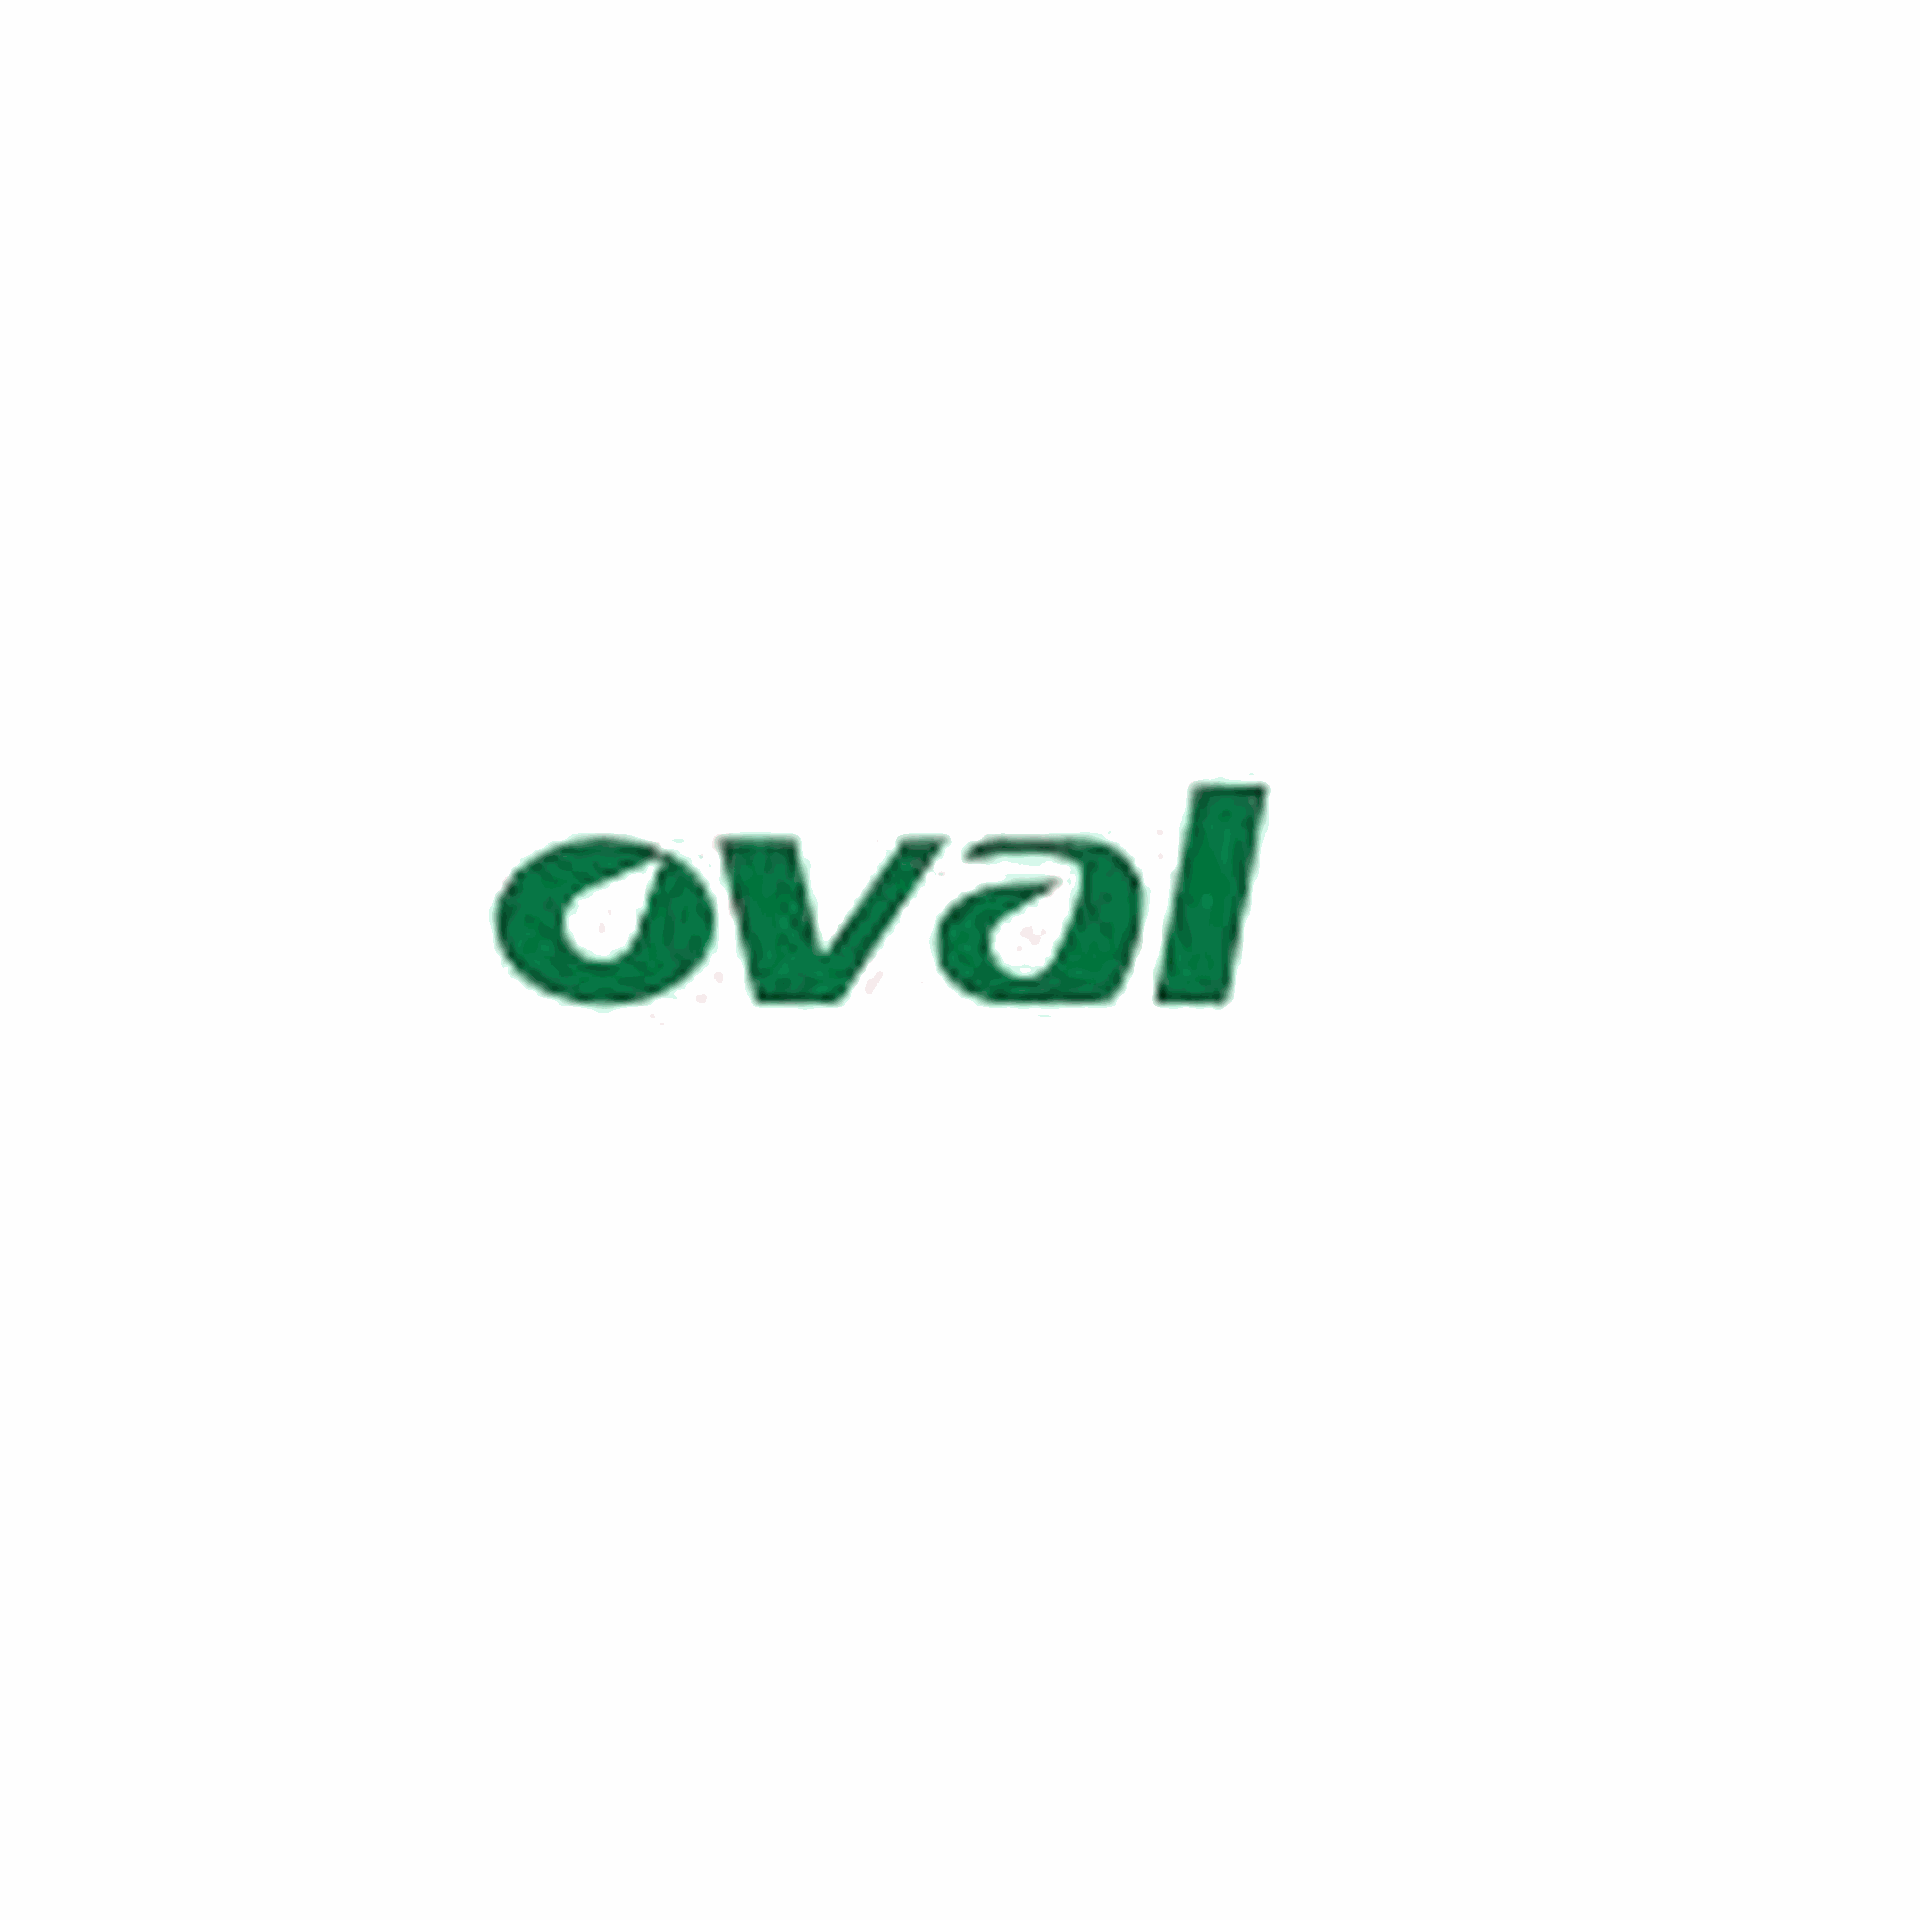 Product Brand: Oval